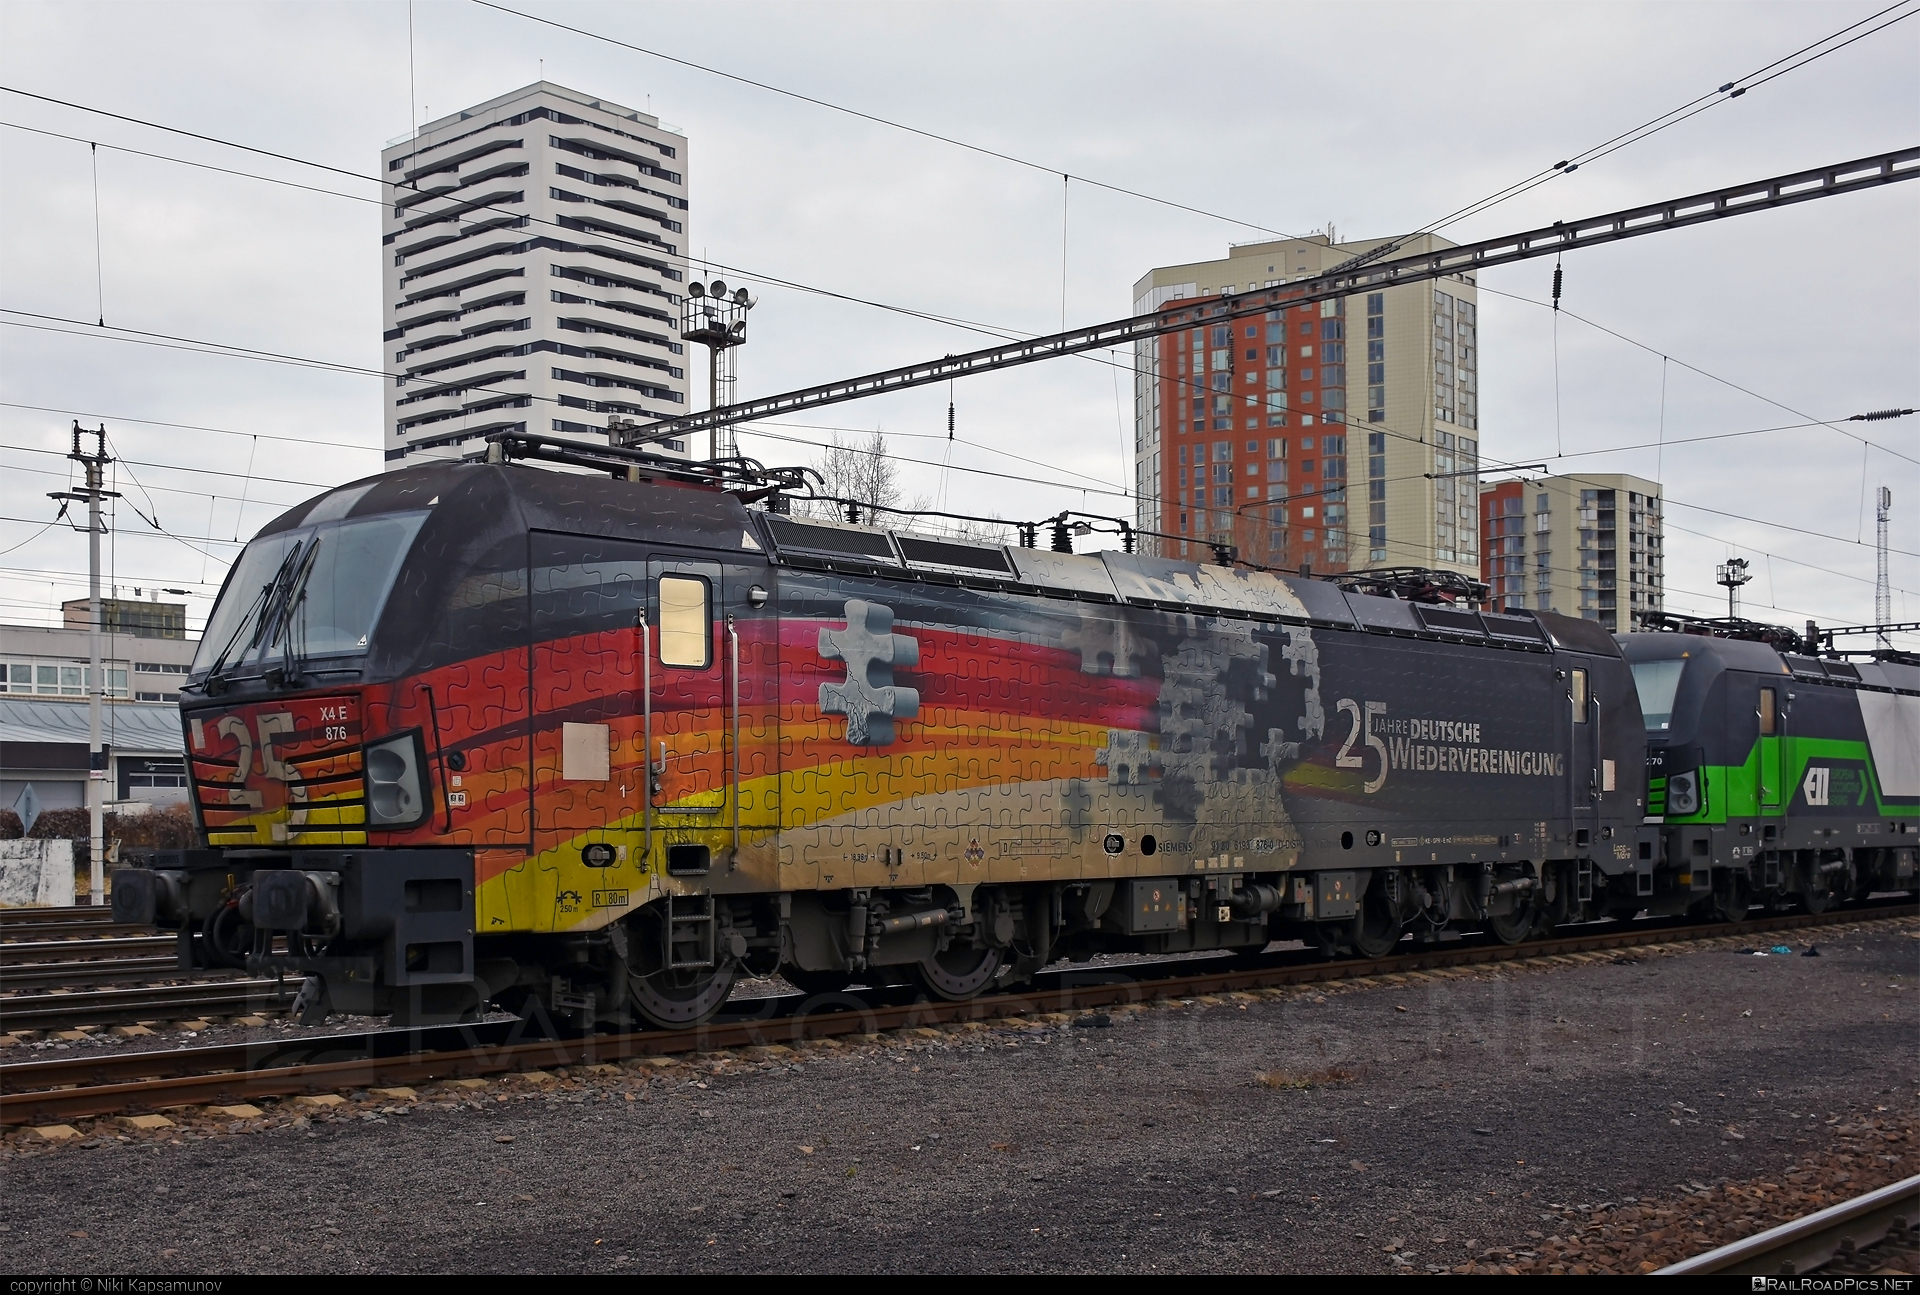 Siemens Vectron AC - 193 876 operated by LTE Logistik und Transport GmbH #dispolok #lte #ltelogistikundtransport #ltelogistikundtransportgmbh #mitsuirailcapitaleurope #mitsuirailcapitaleuropegmbh #mrce #siemens #siemensvectron #siemensvectronac #vectron #vectronac